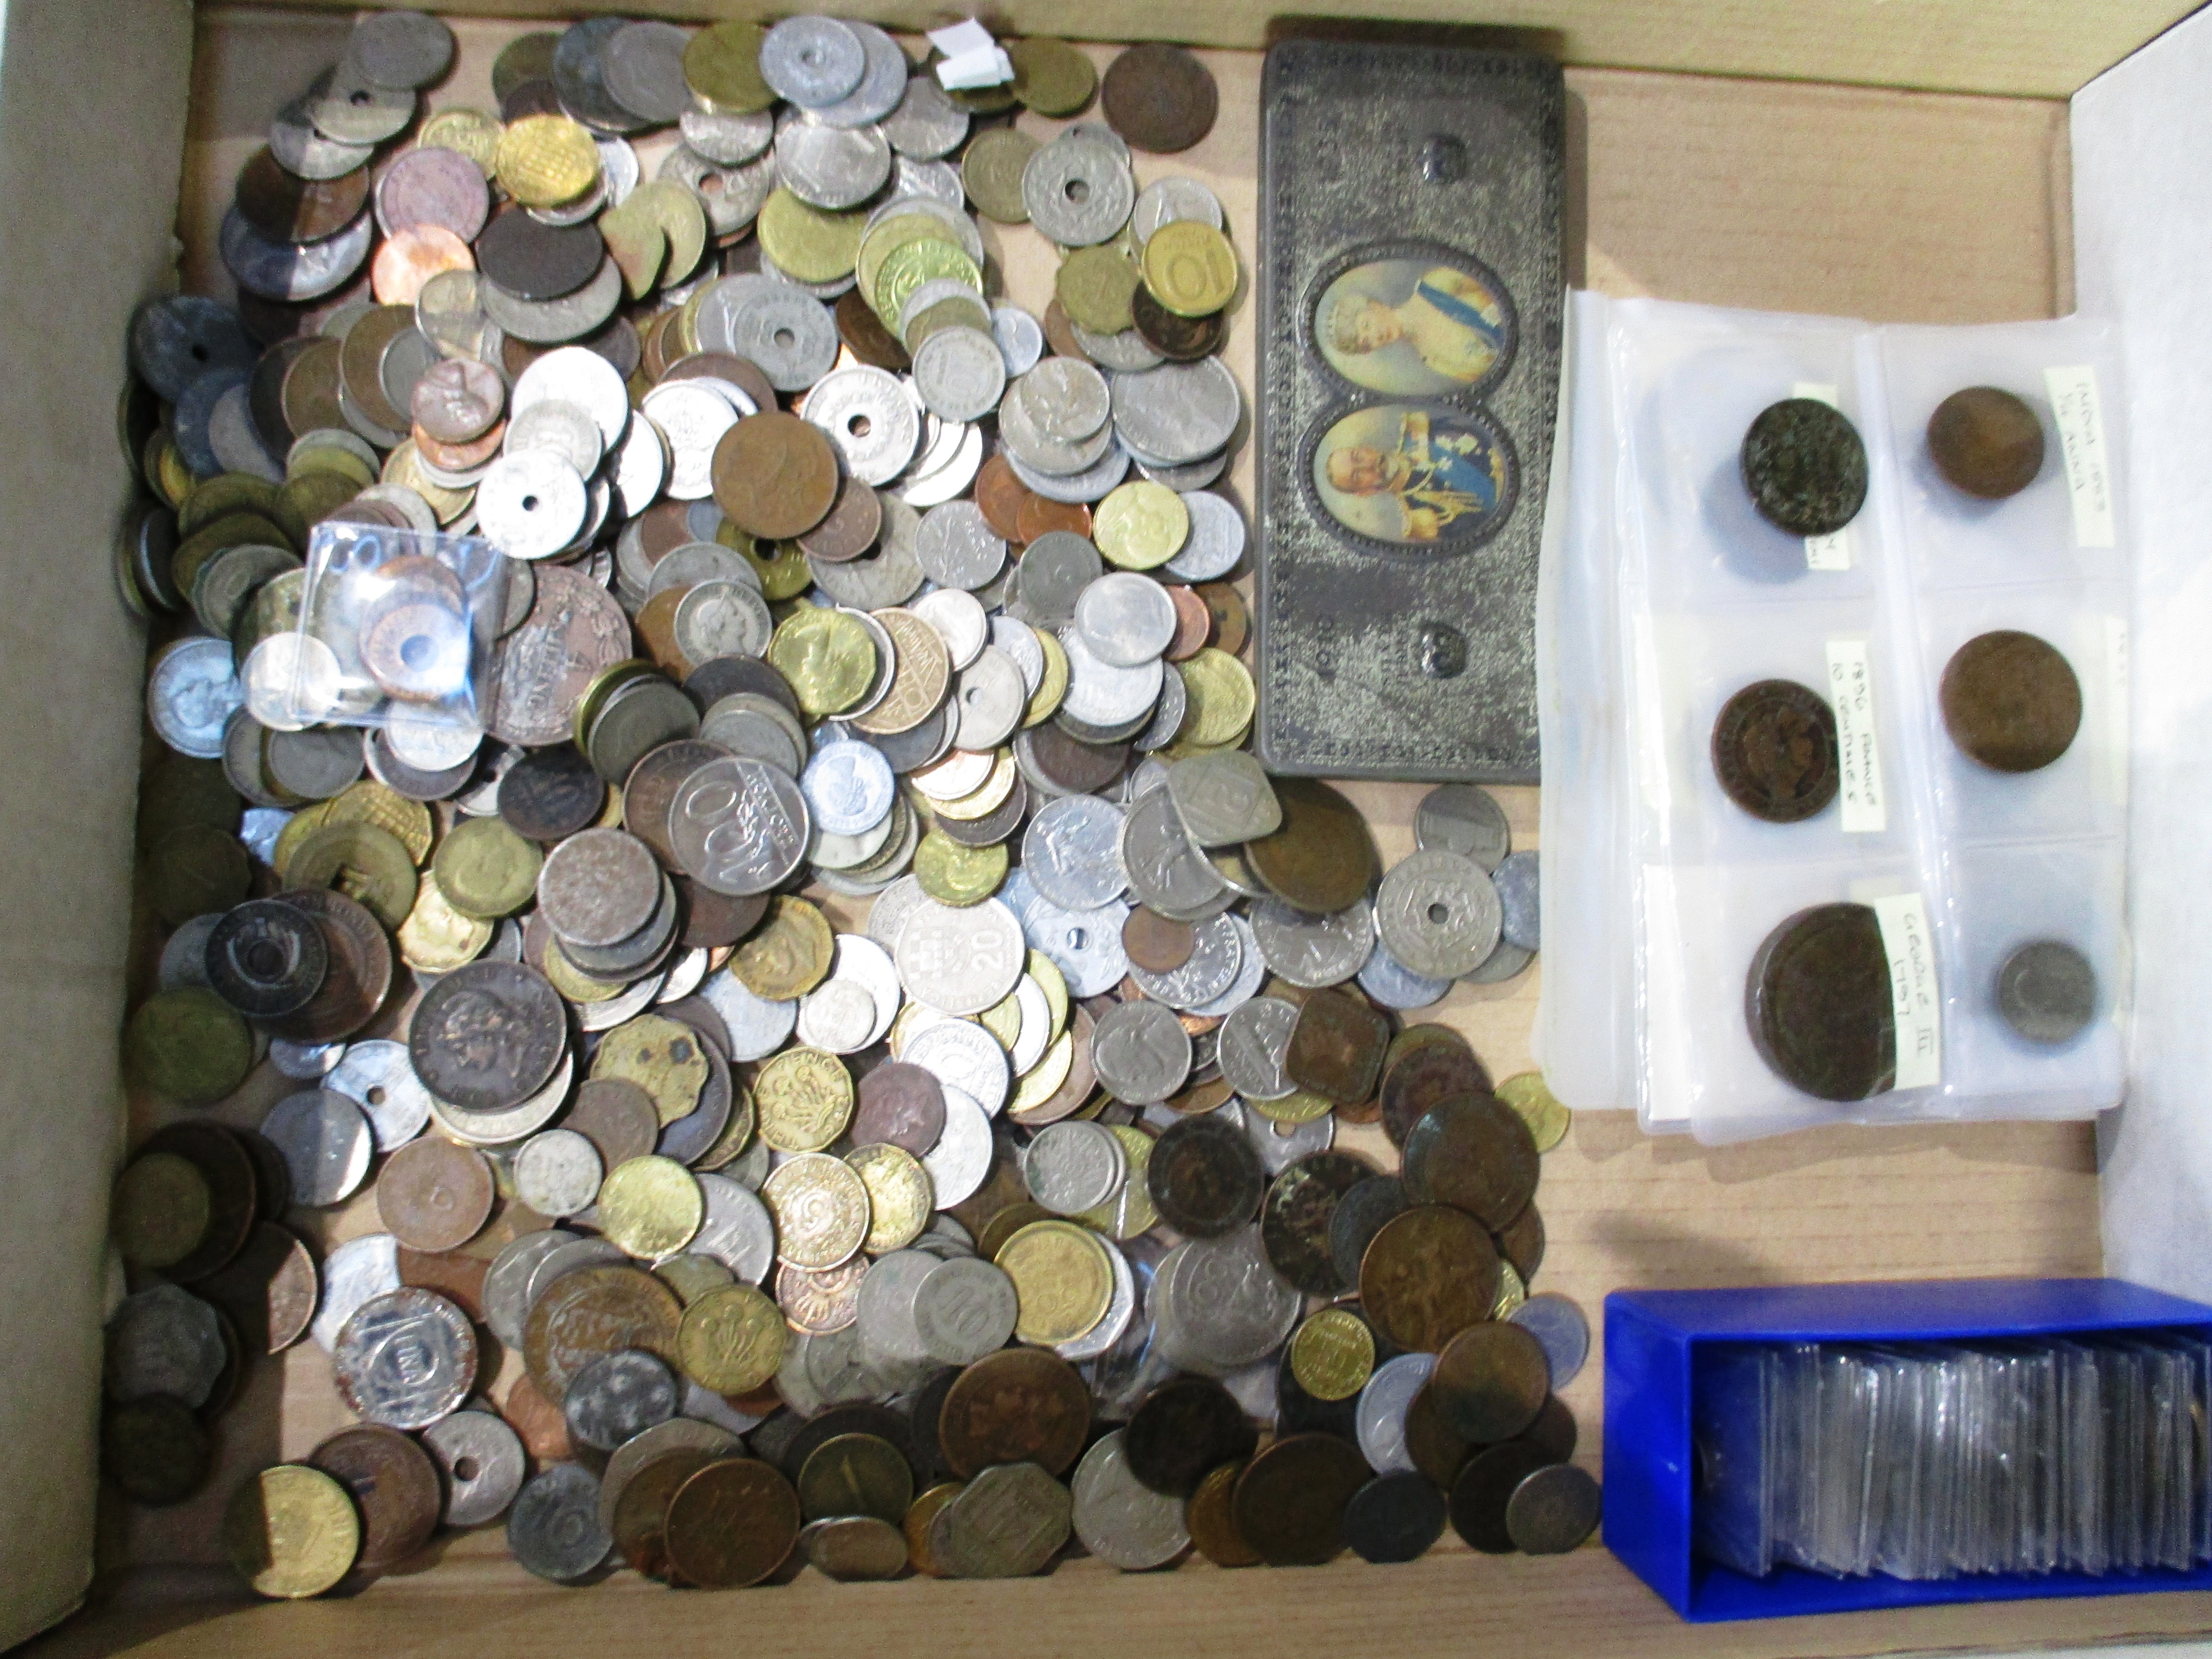 Contents to tray - quantity of world coins, box of coins in wallets including several silver,